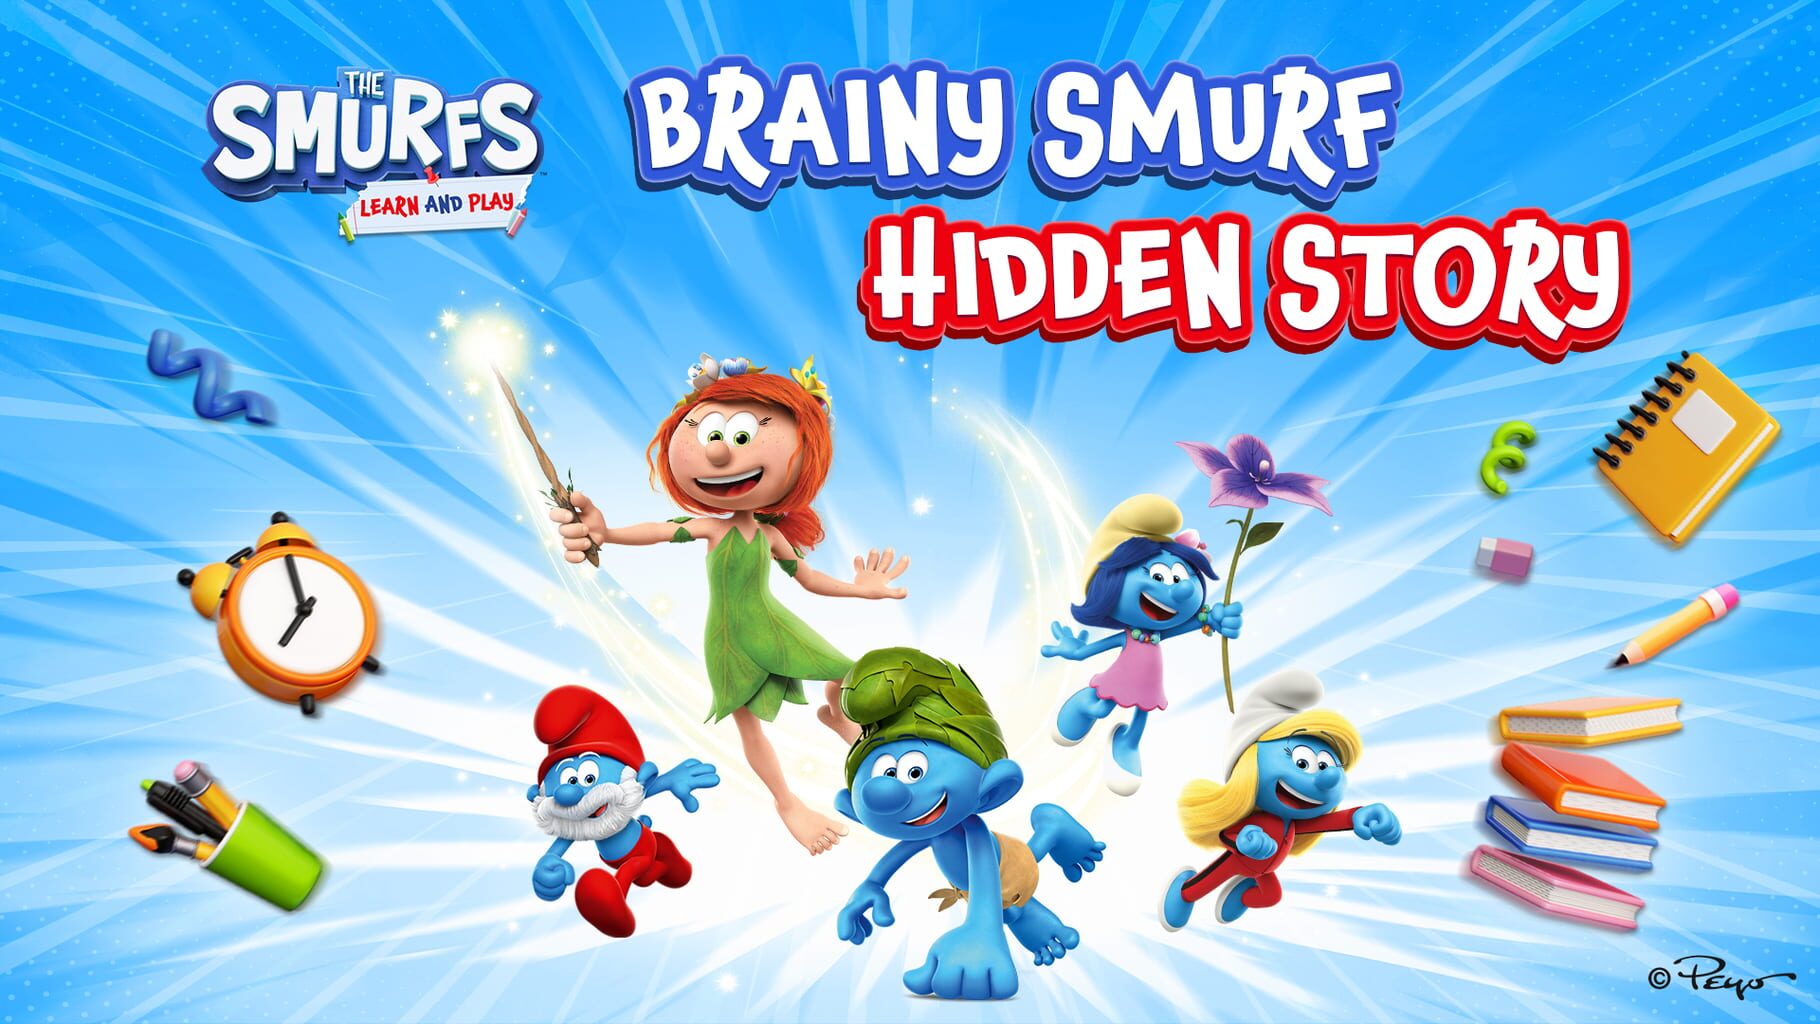 The Smurfs: Learn and Play - Brainy Smurf Hidden Story Image